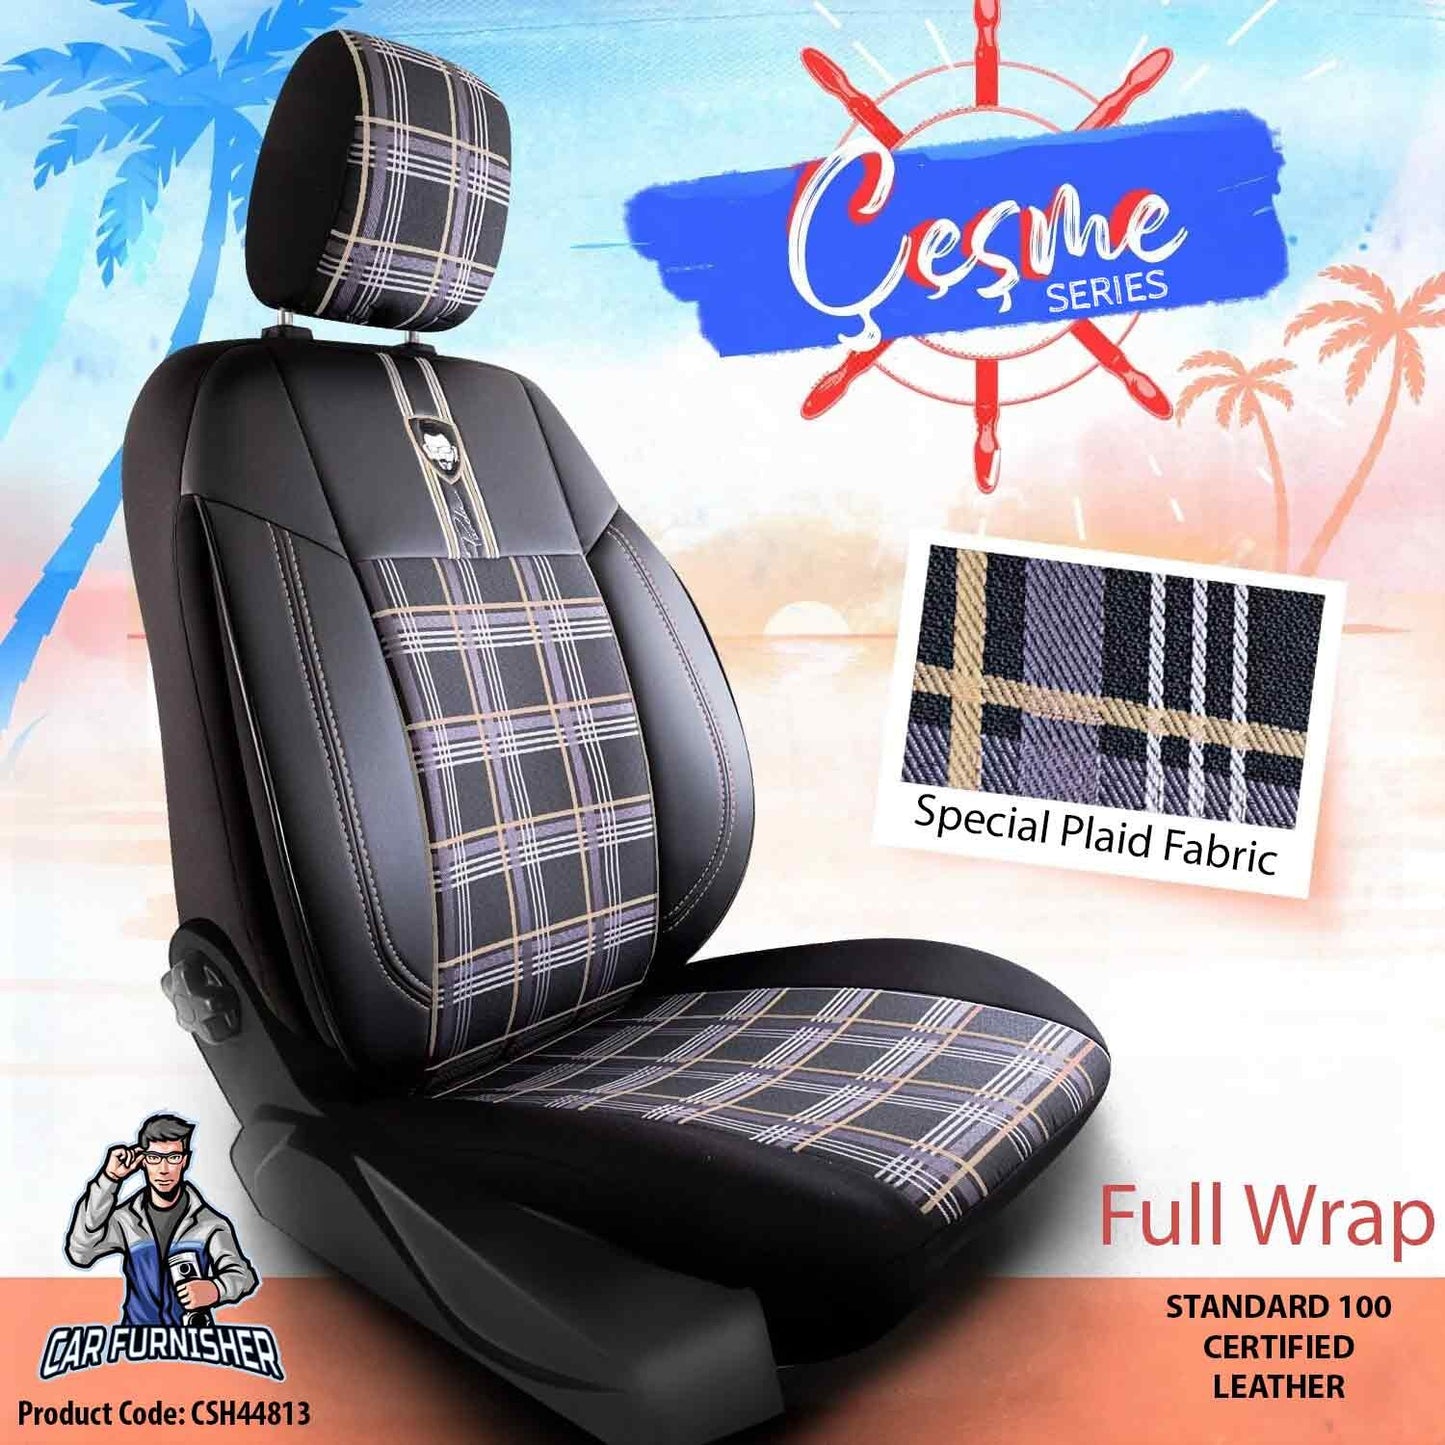 Luxury Car Seat Cover Set (4 Colors) | Cesme Series Beige Leather & Fabric